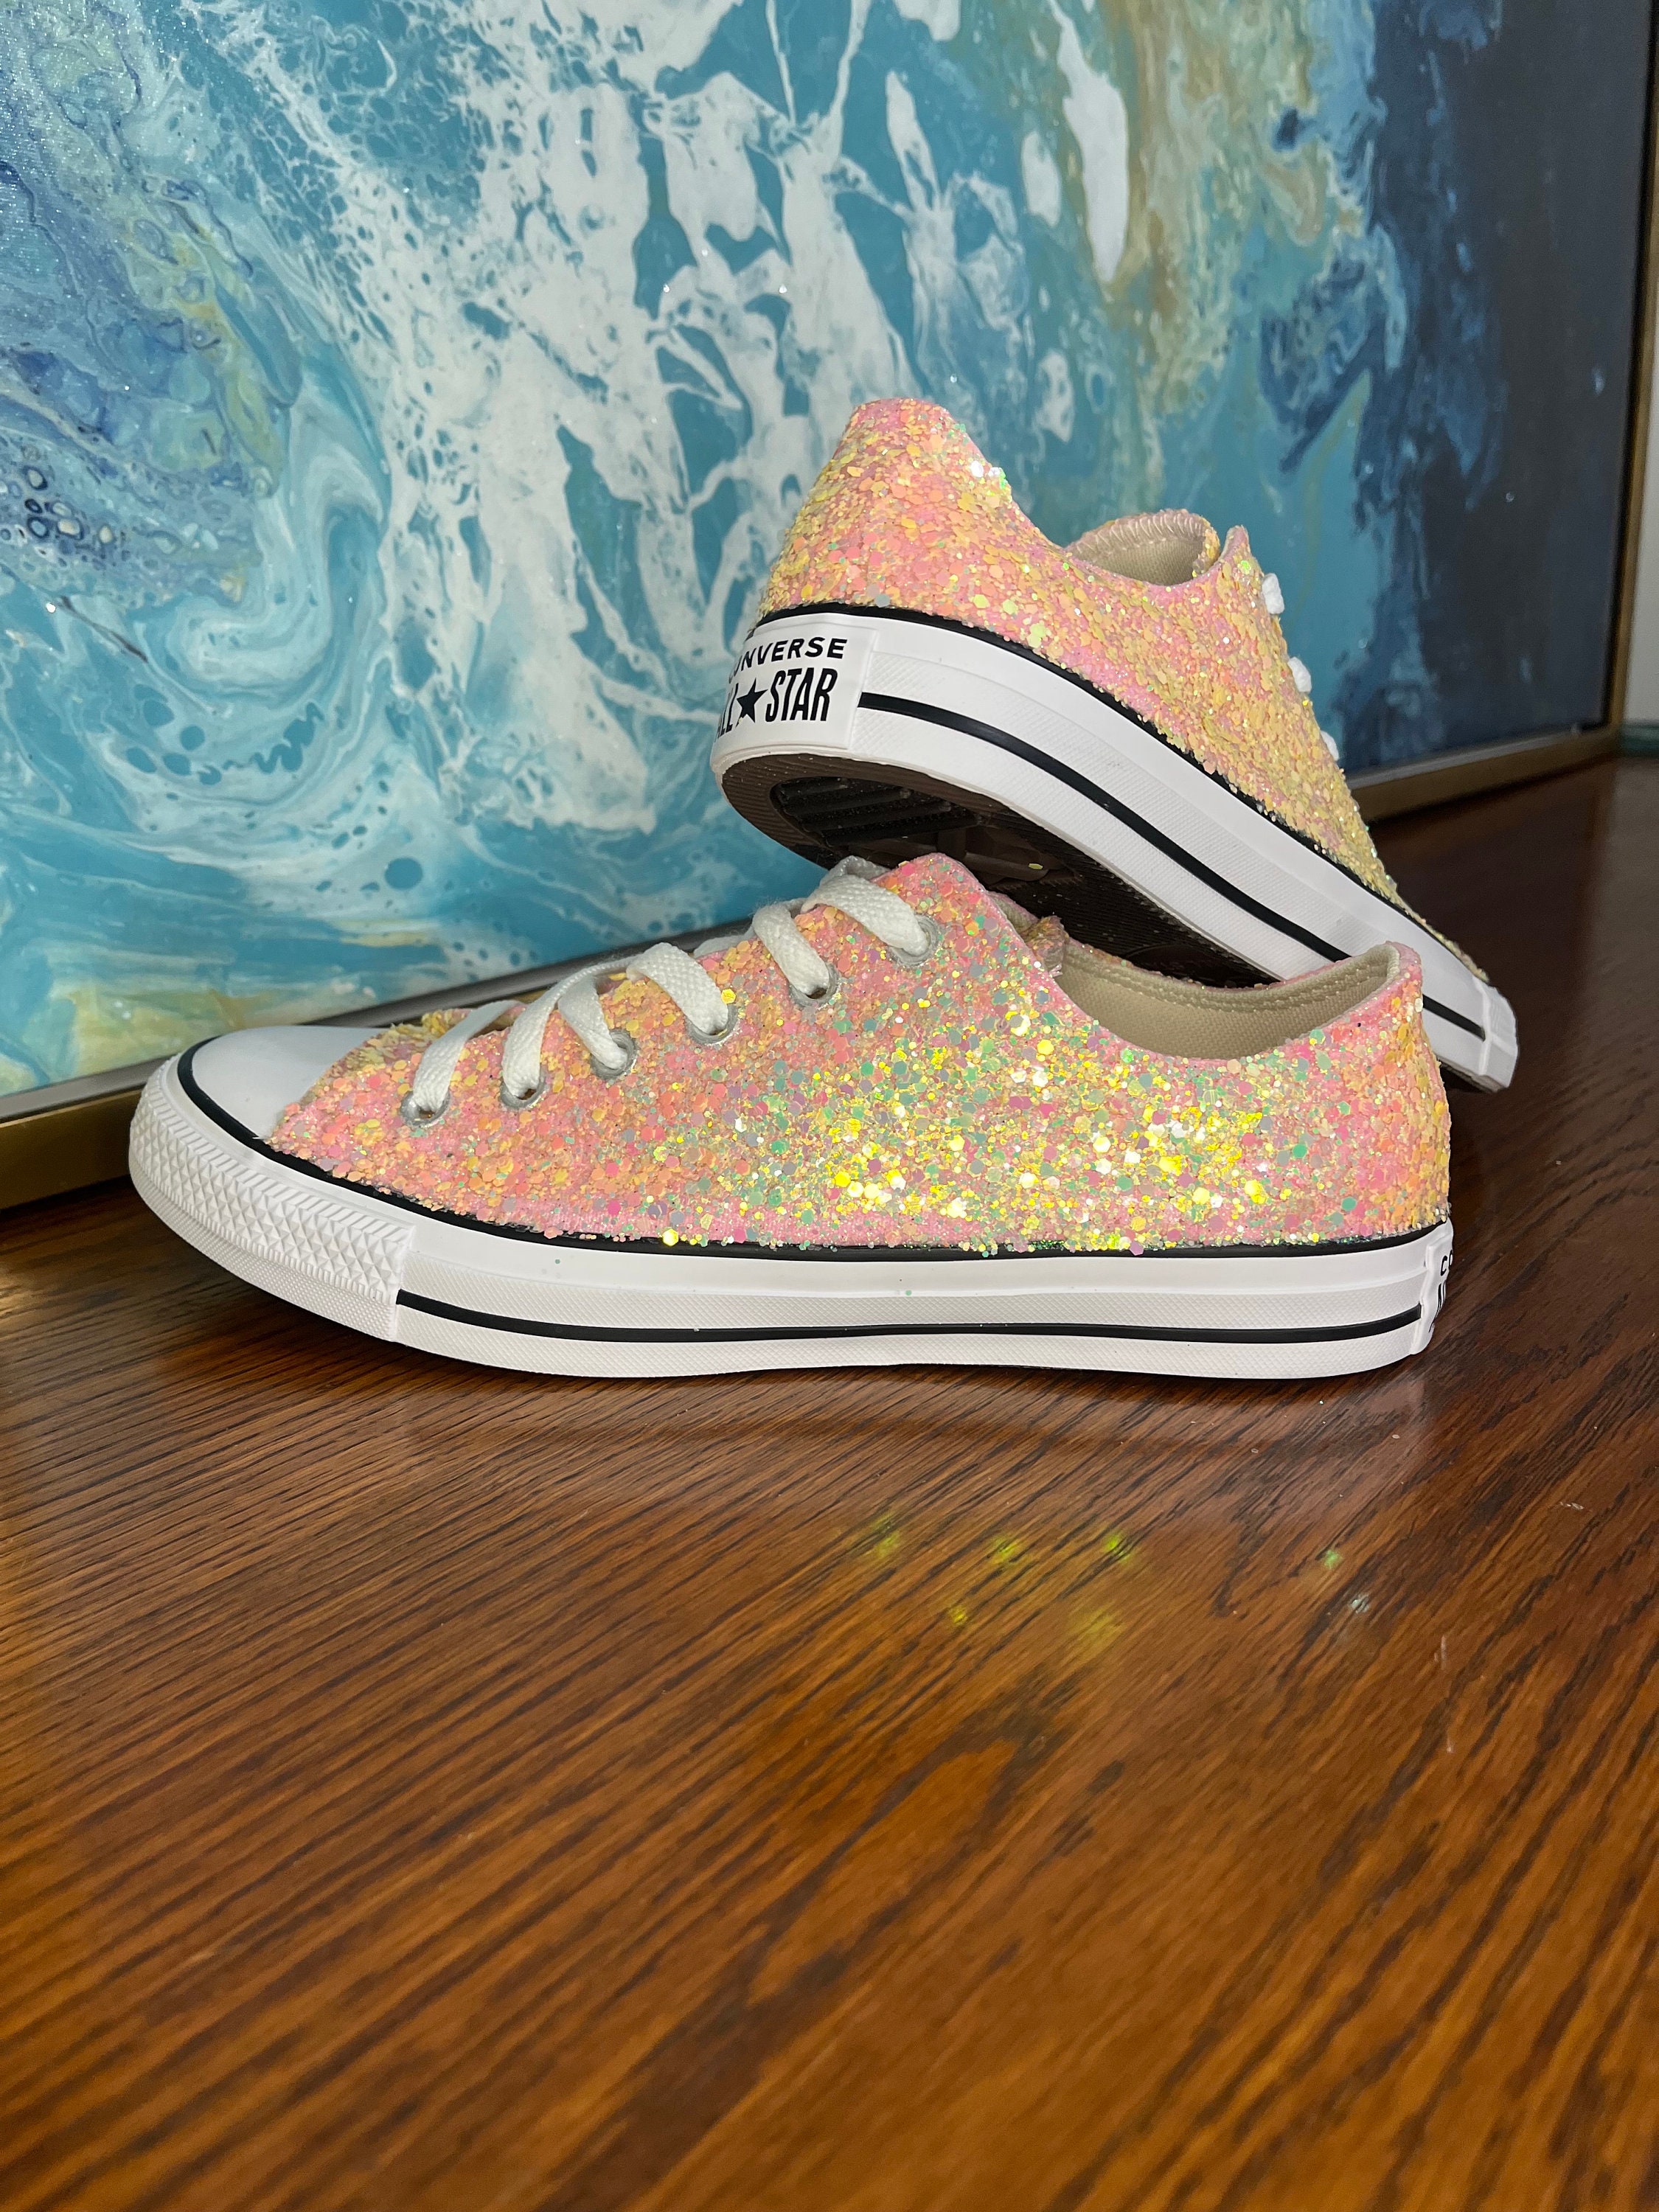 Wedding High Top Converse-bridal Sneakers-bling Sneakers-chucks and  Pearls-bling Chuck Taylors-bling Sneakers 